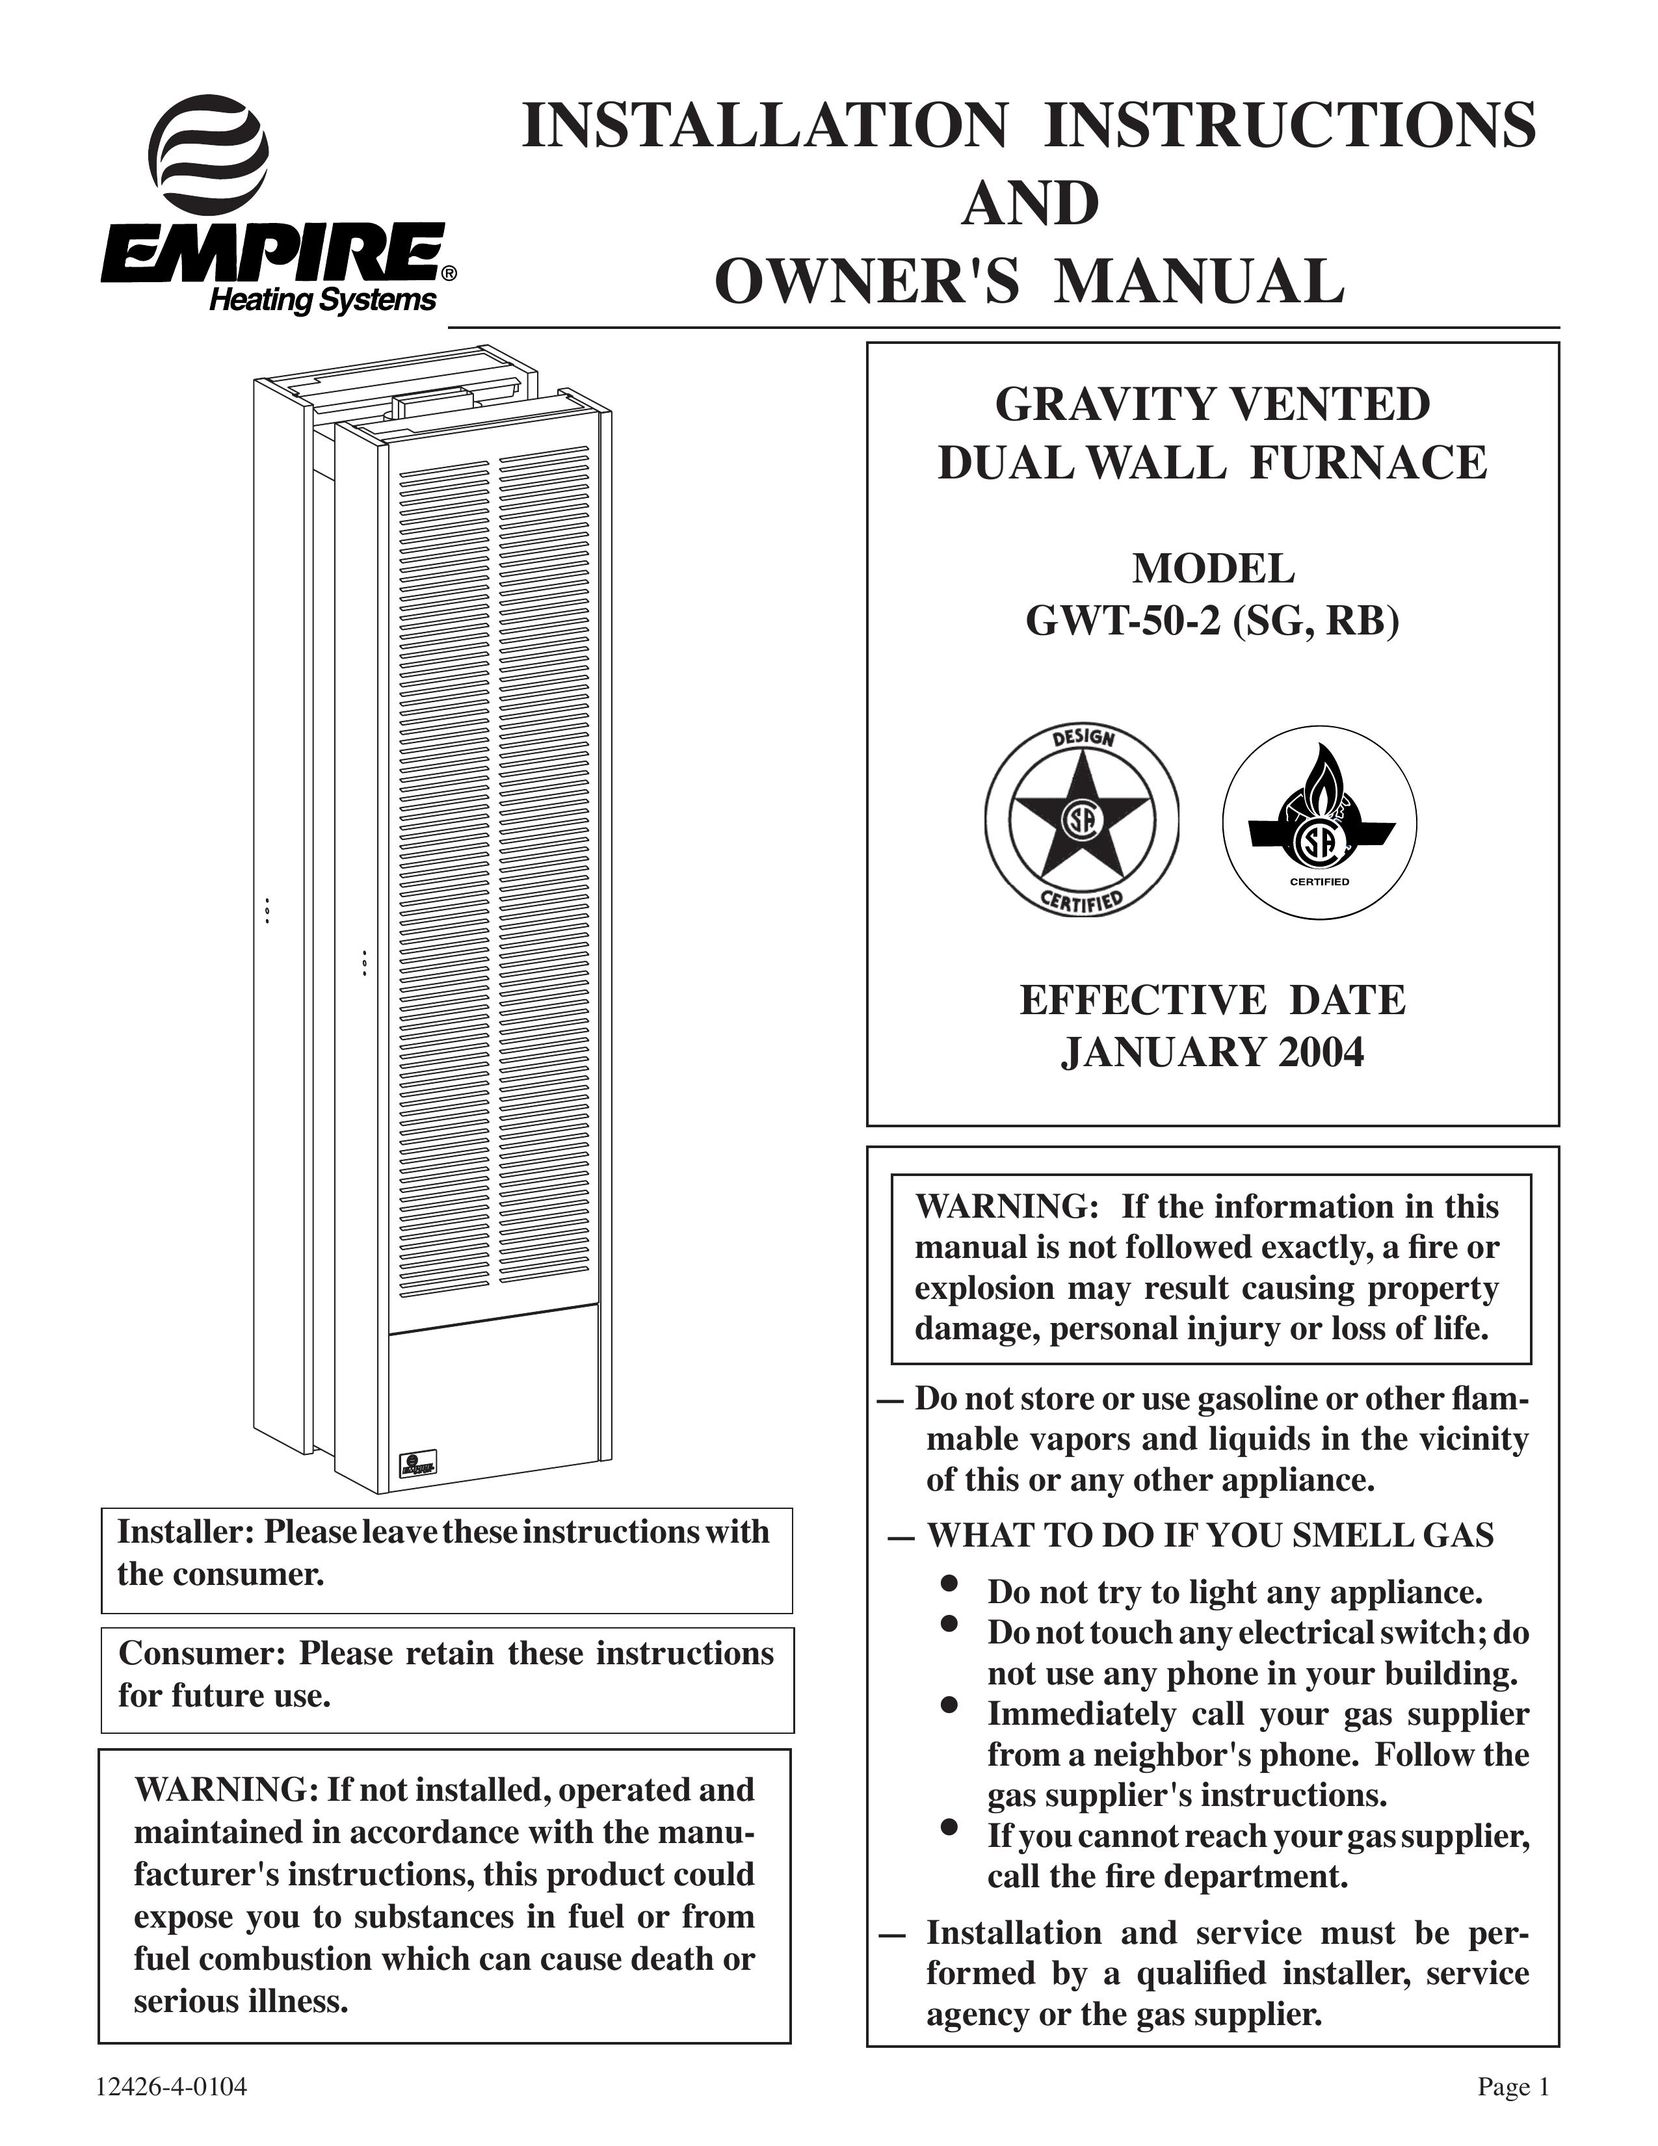 Empire Comfort Systems RB) Furnace User Manual